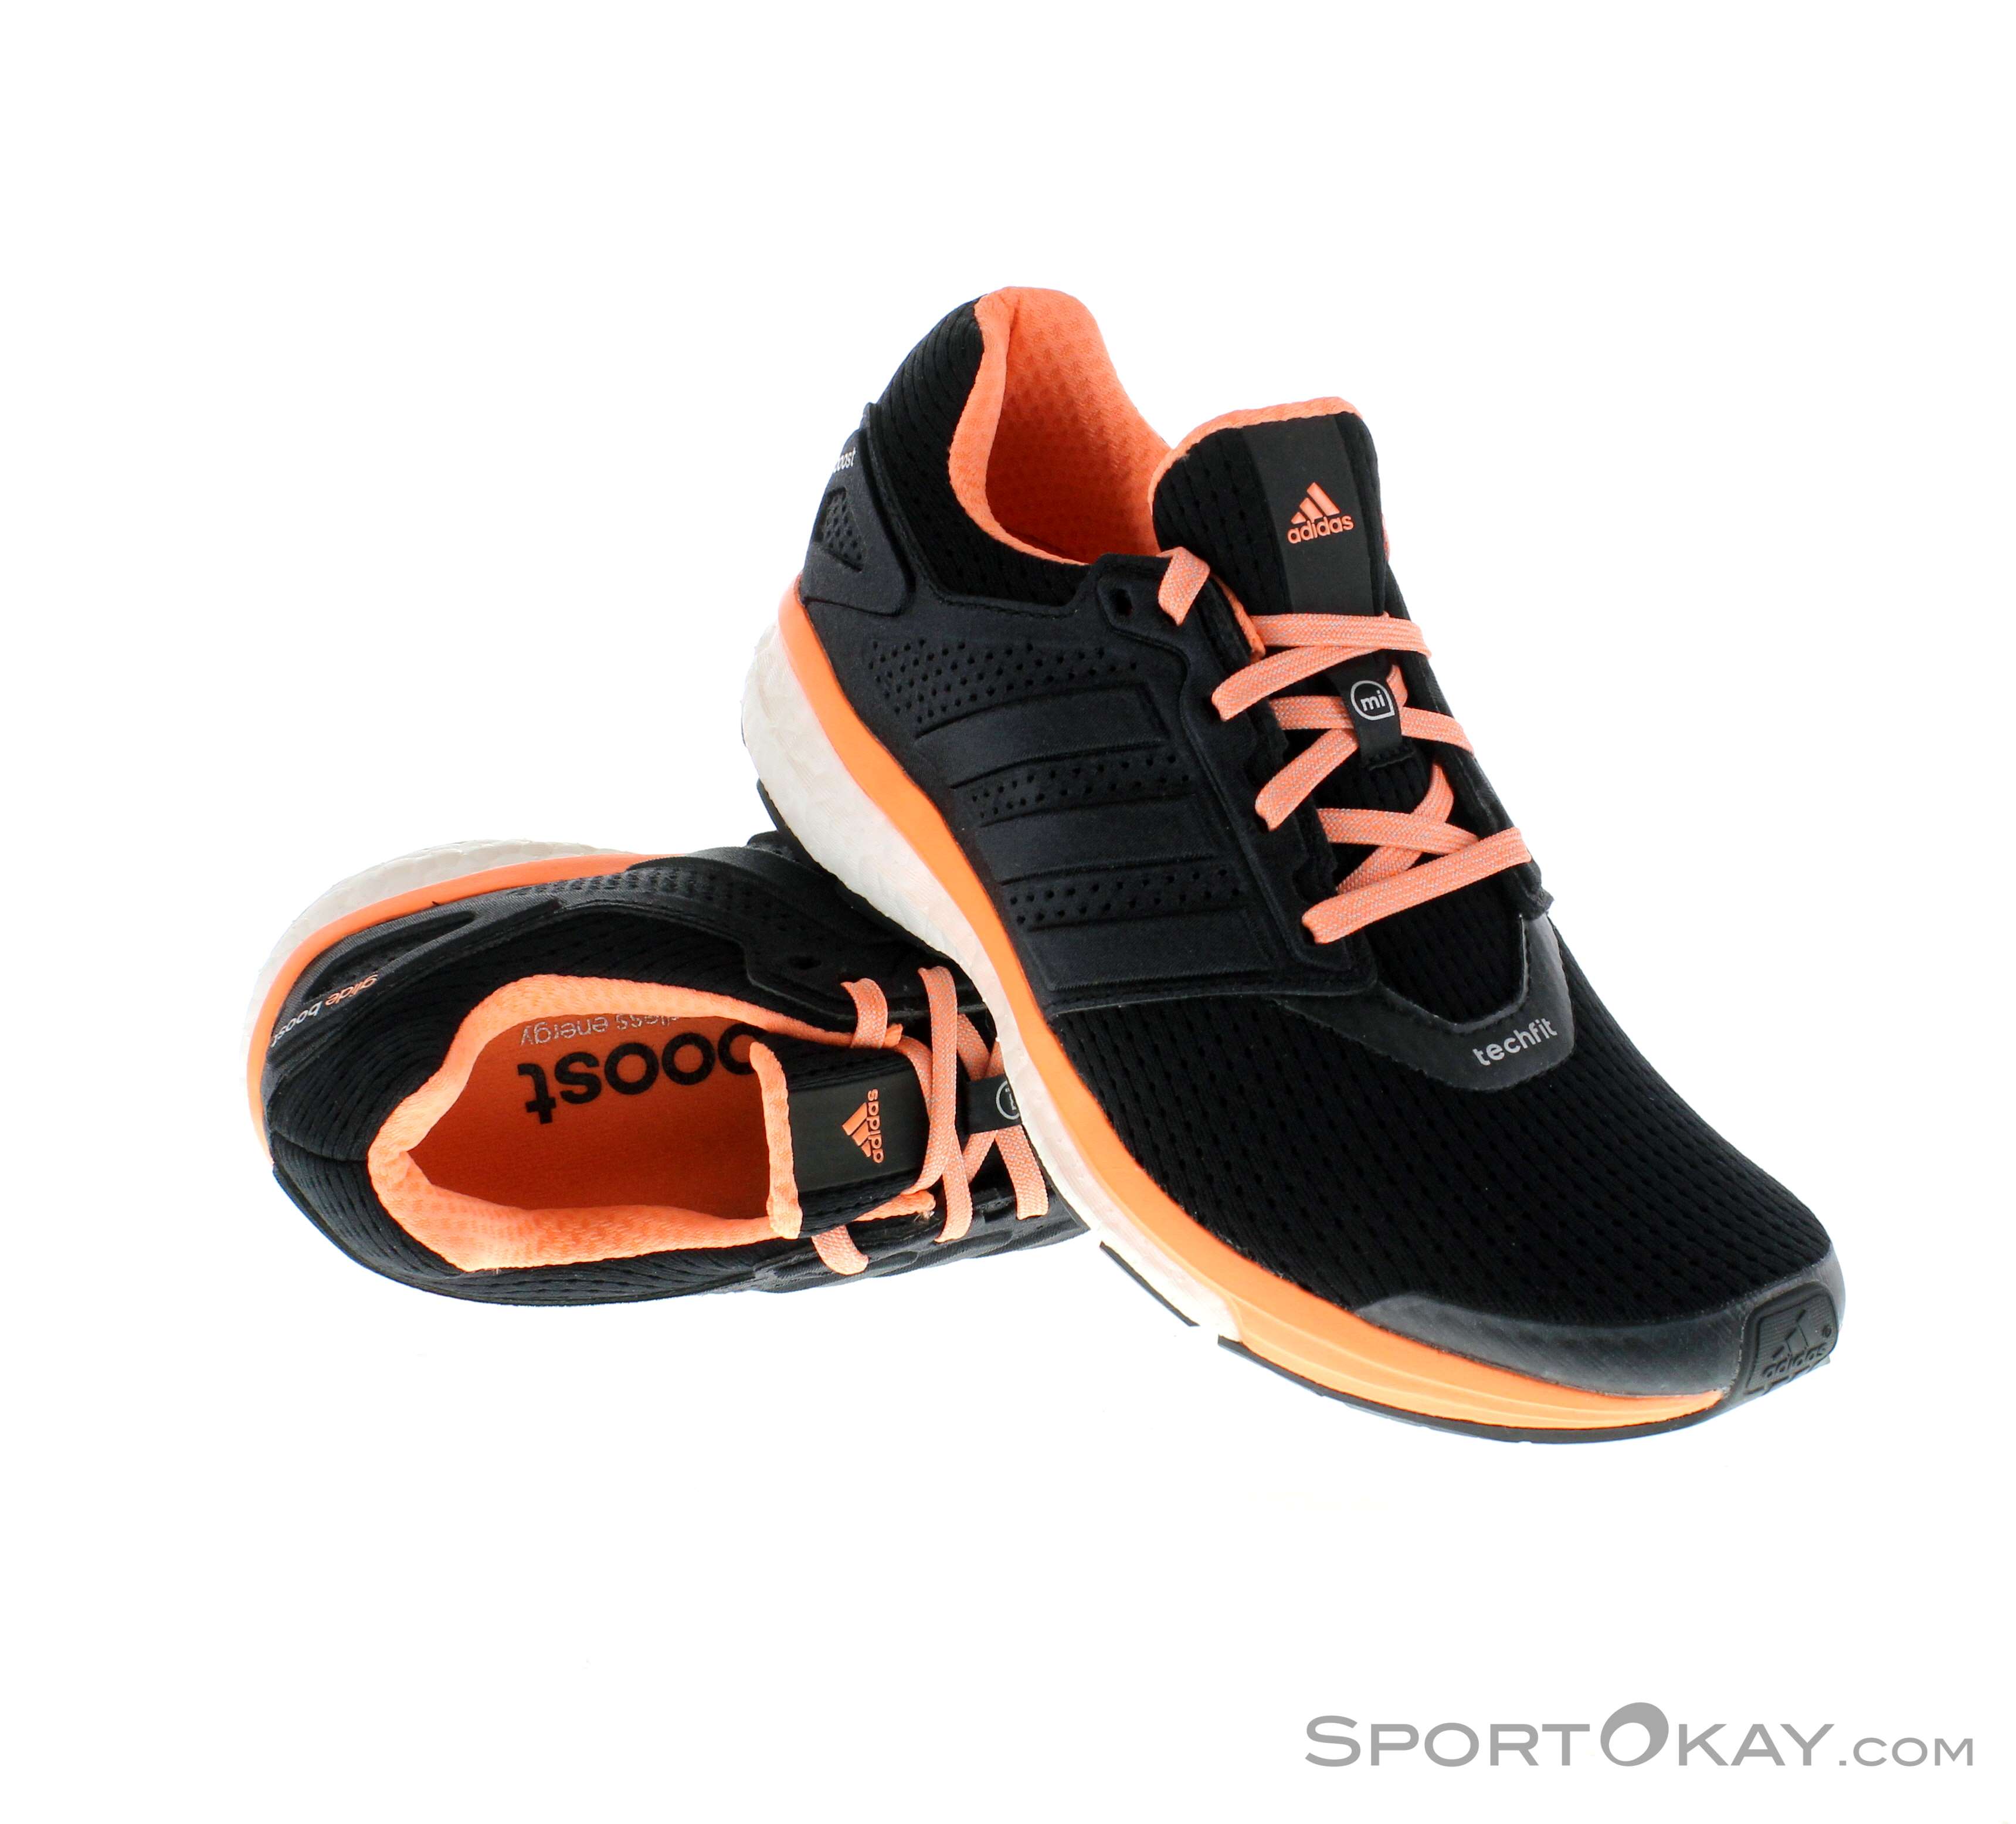 Purchase > adidas supernova glide ladies running shoes, Up to 63% OFF